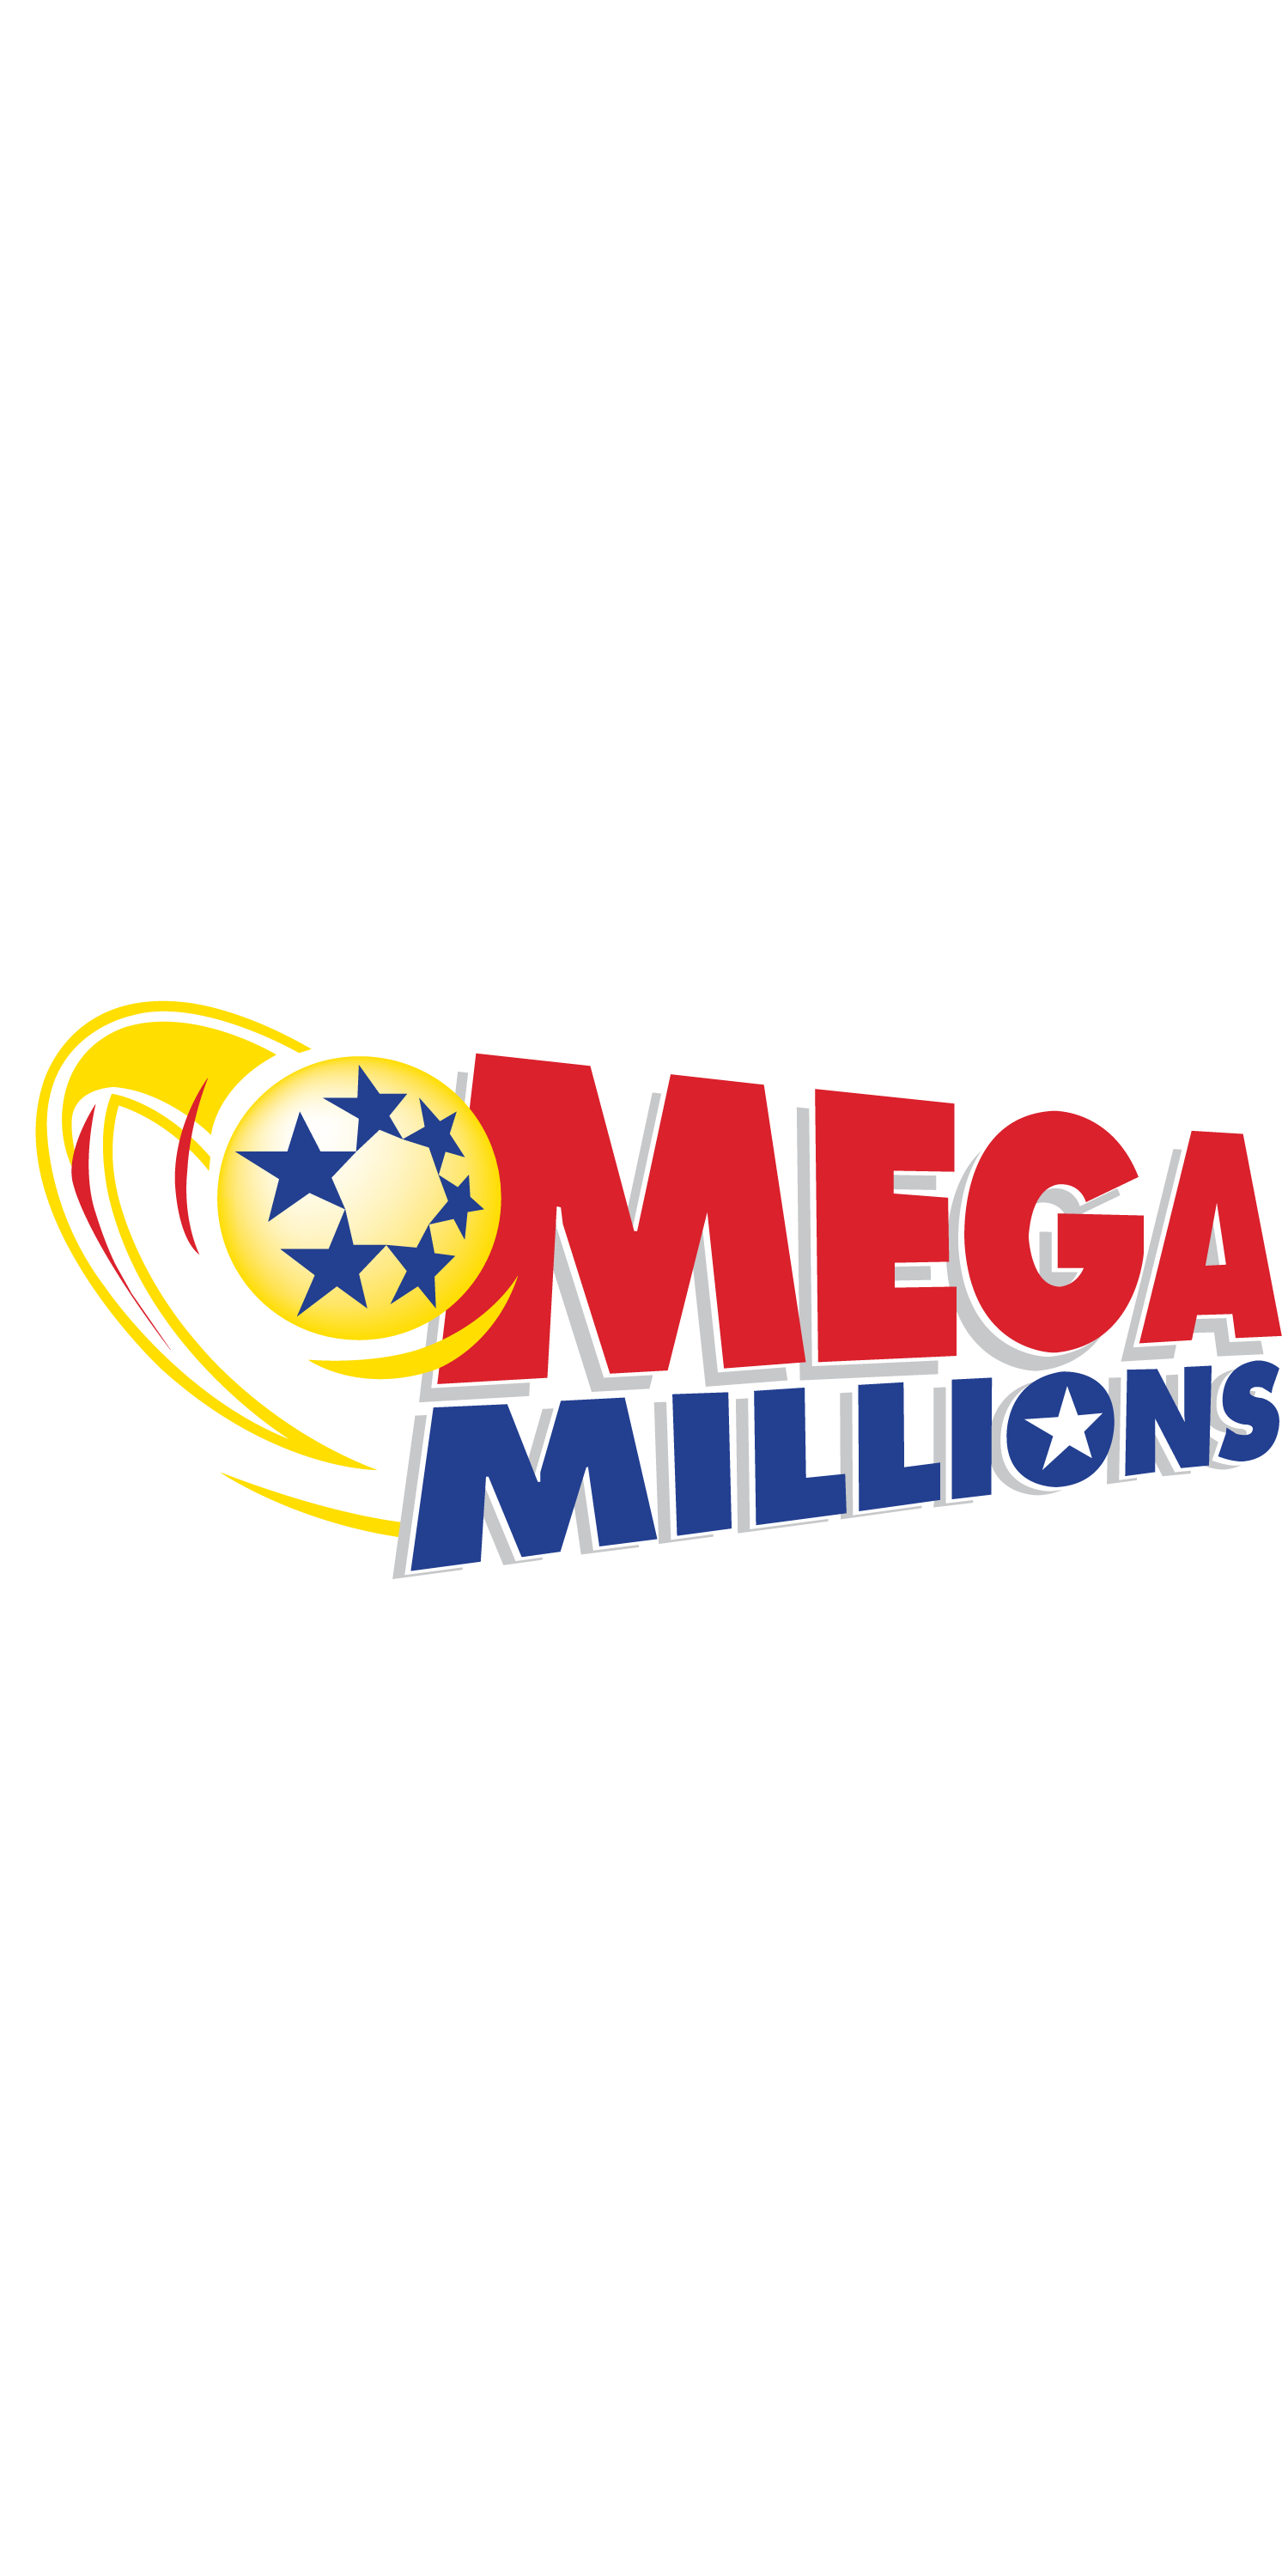 Mega Millions winning numbers for Friday, February 16 lottery drawing